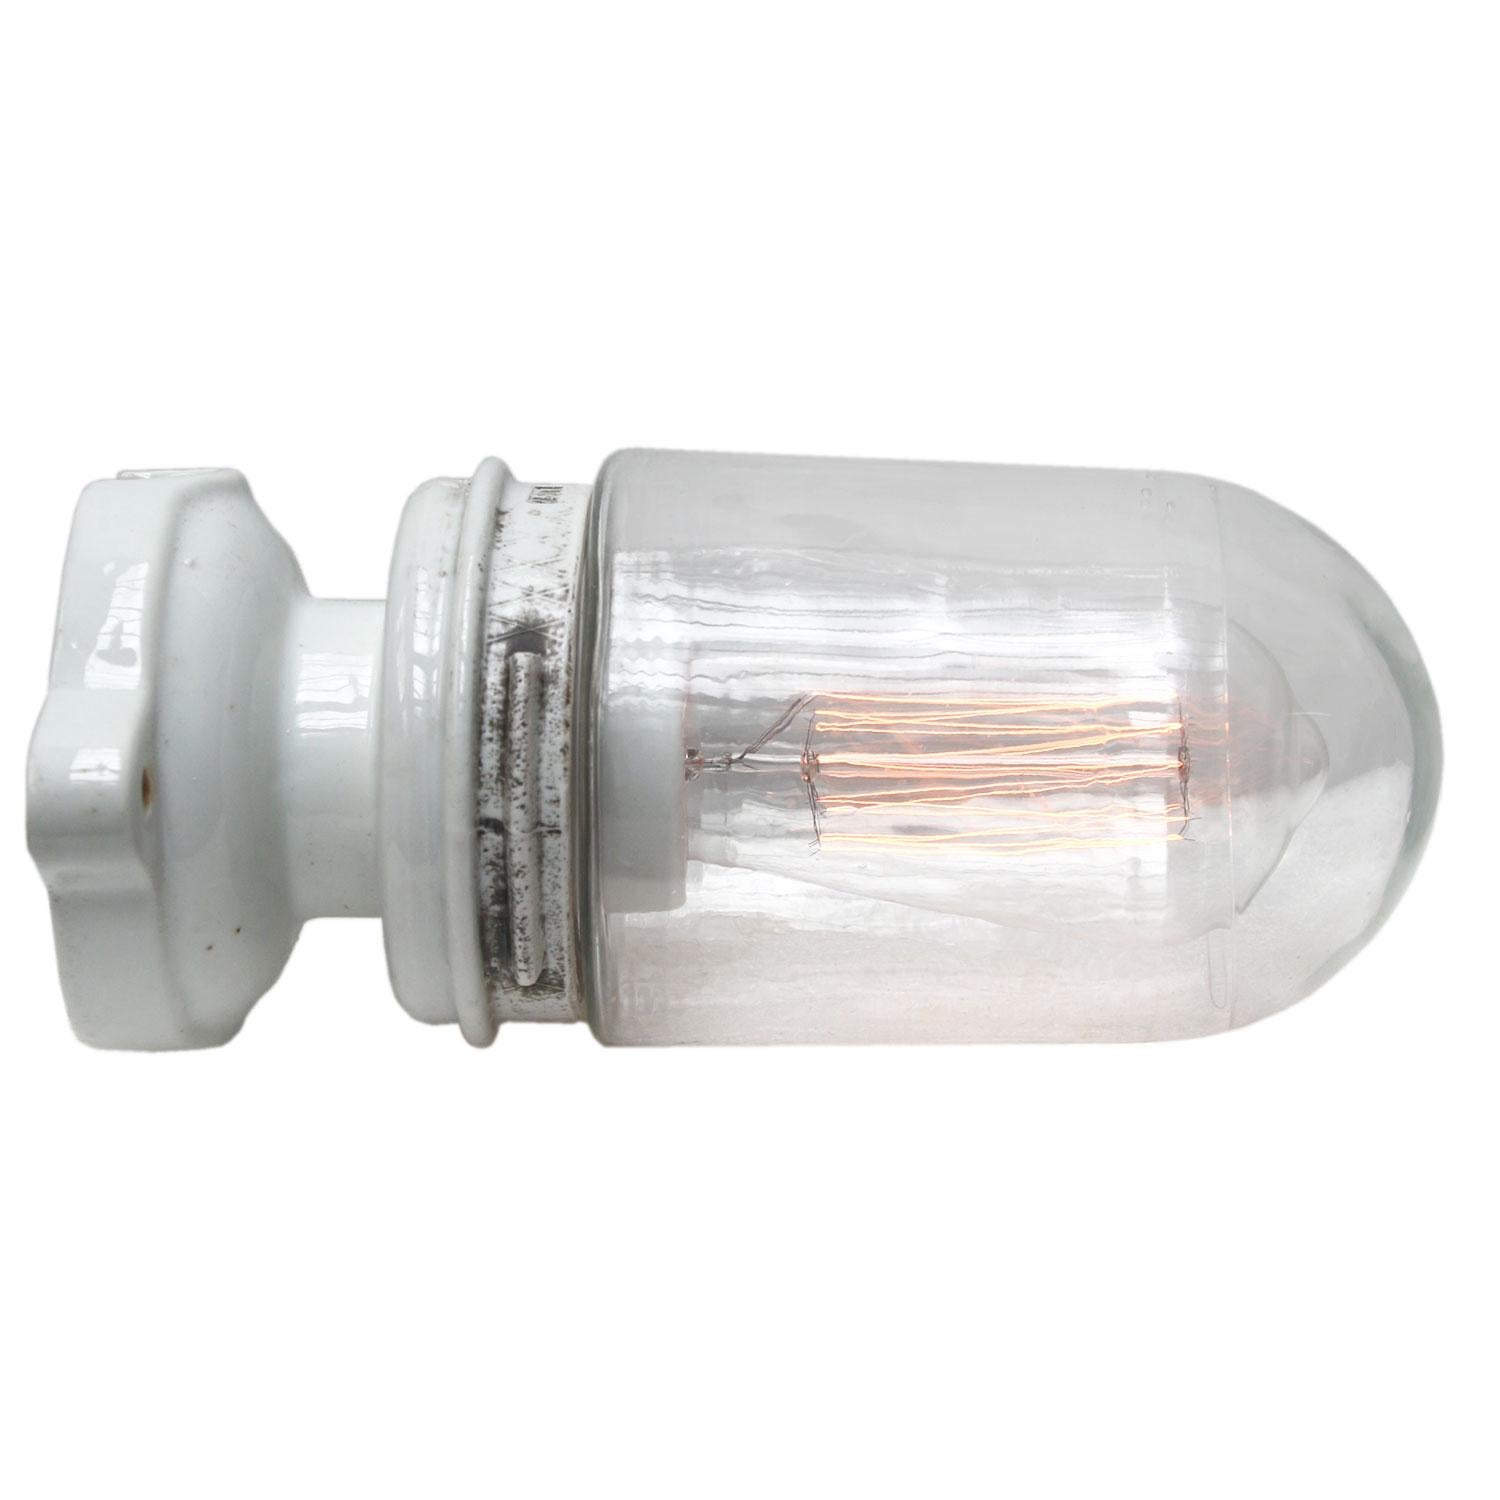 Industrial ceiling lamp.
White porcelain, clear glass.
2 conductors, no ground.

Weight: 1.10 kg / 2.4 lb

Priced per individual item. All lamps have been made suitable by international standards for incandescent light bulbs, energy-efficient